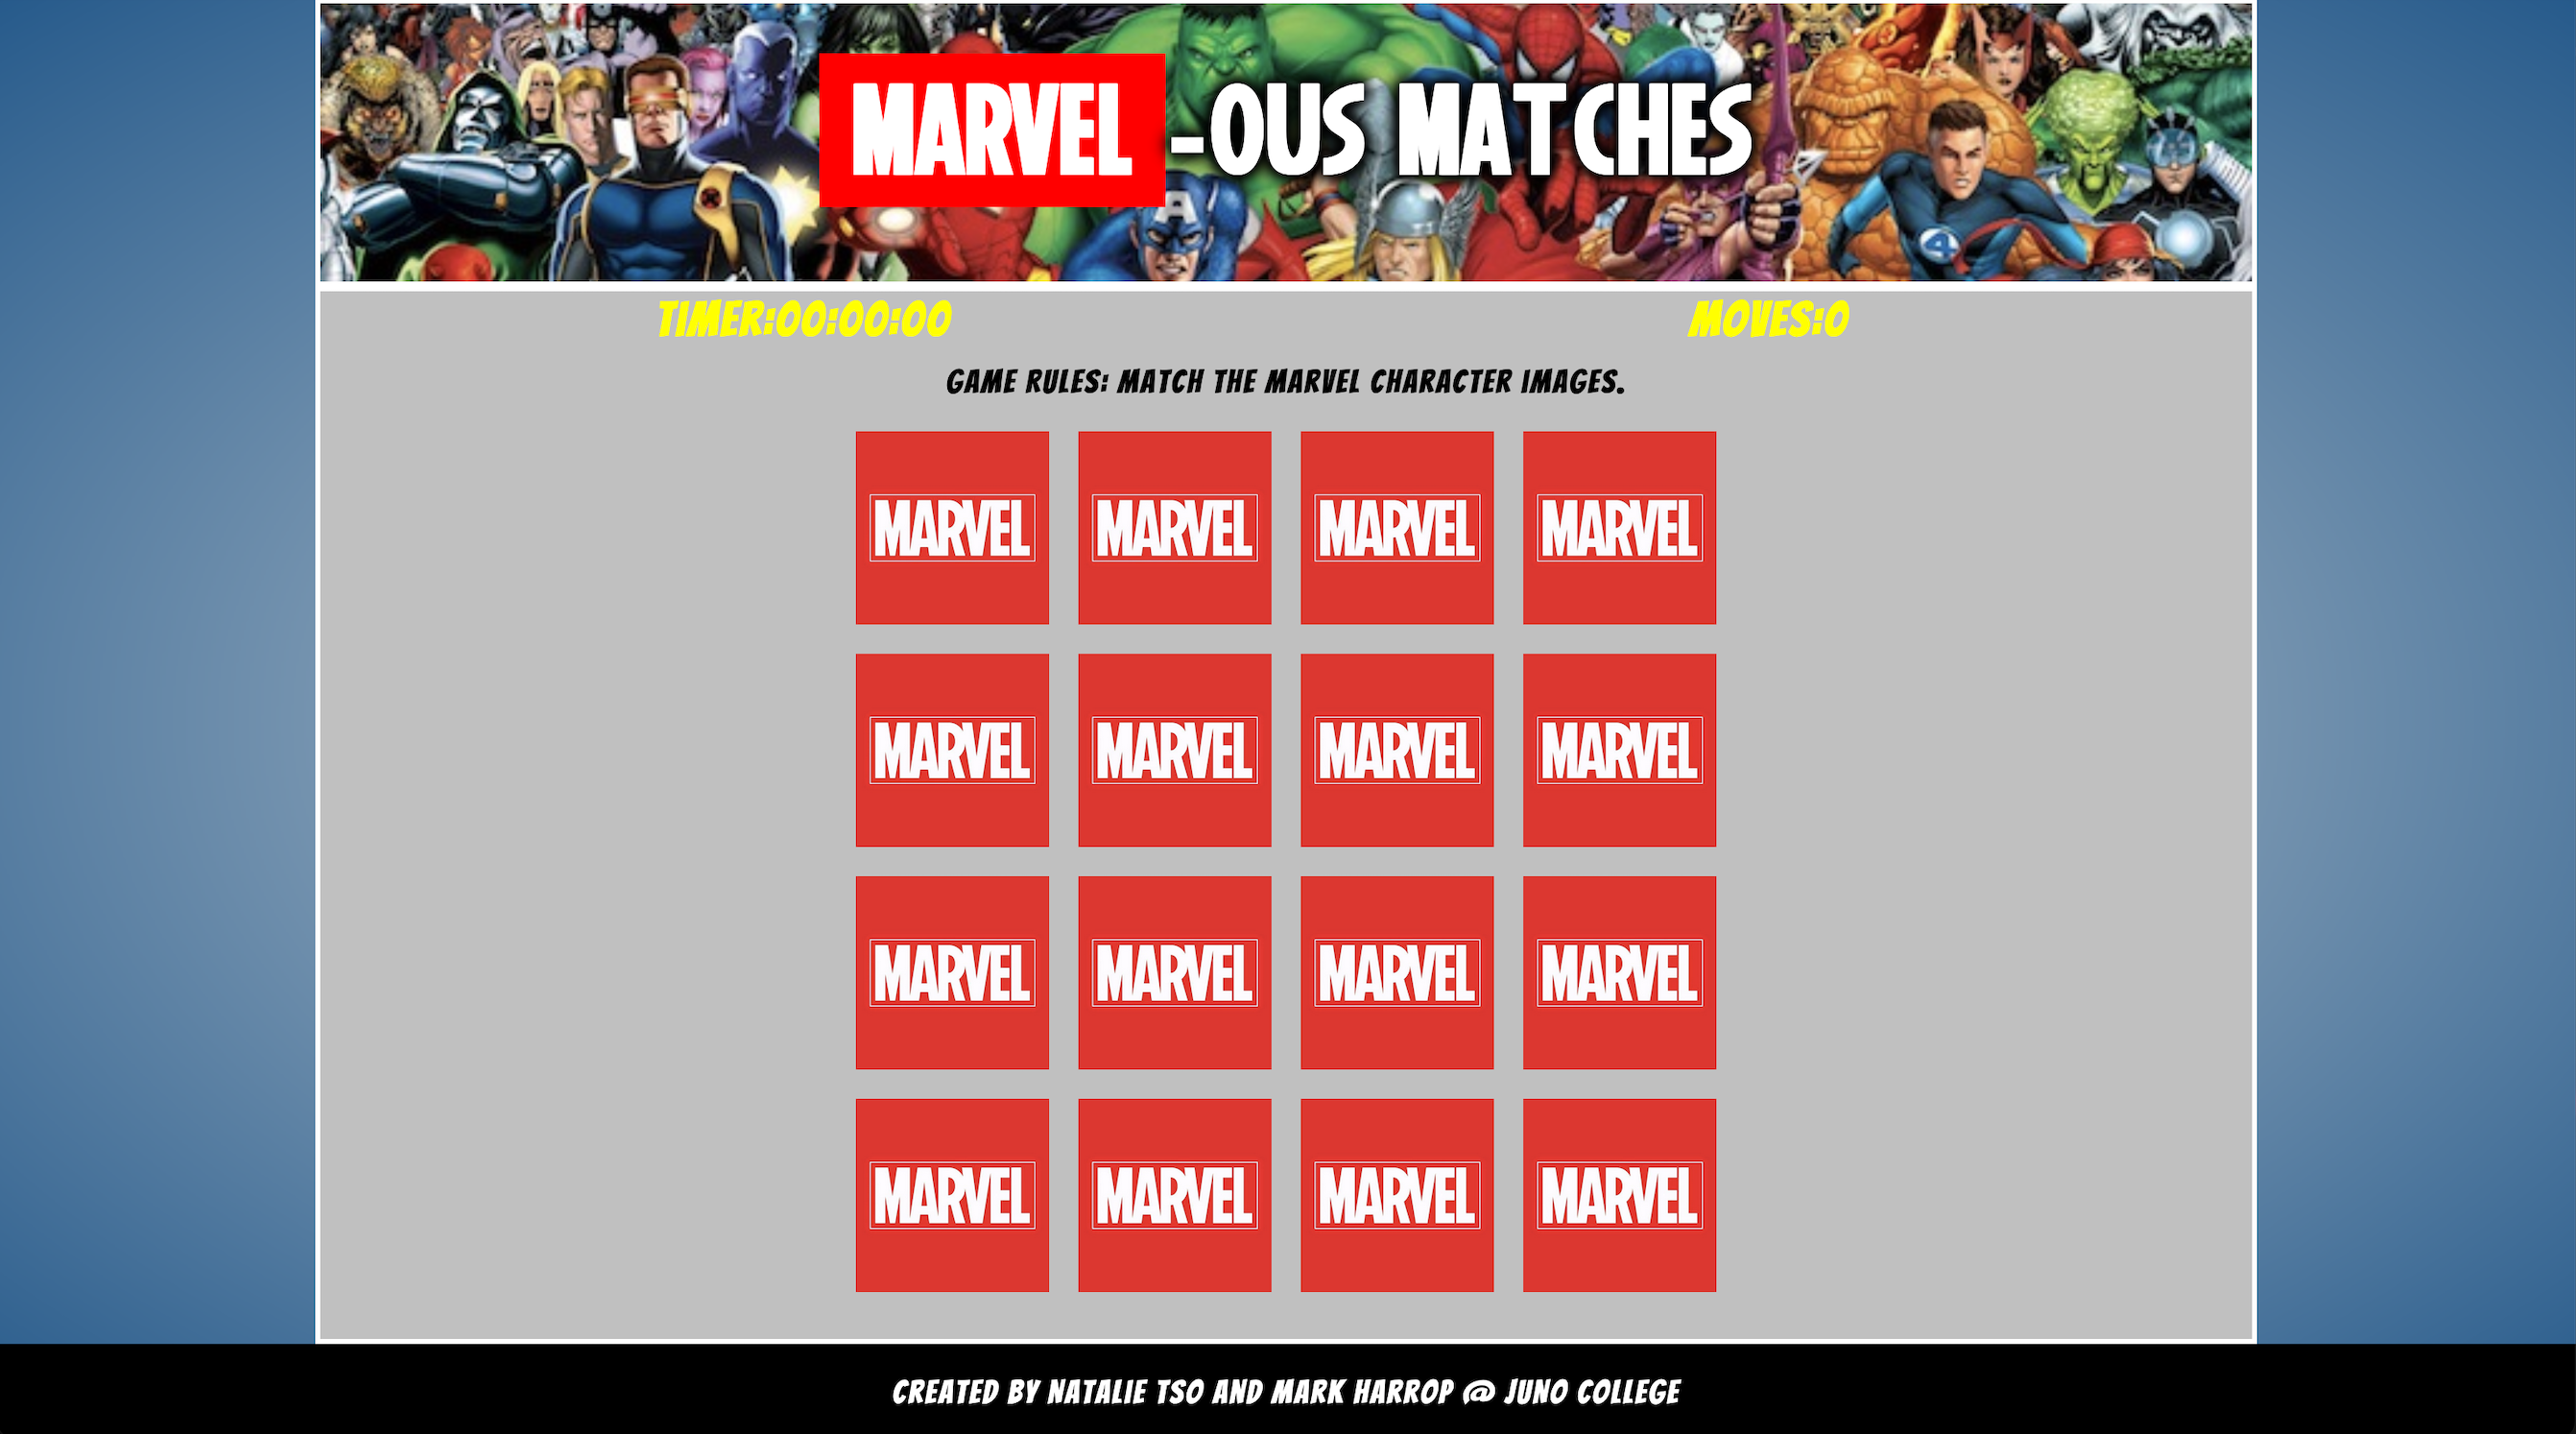 screenshot of the MARVEL-ous Matches memory card game